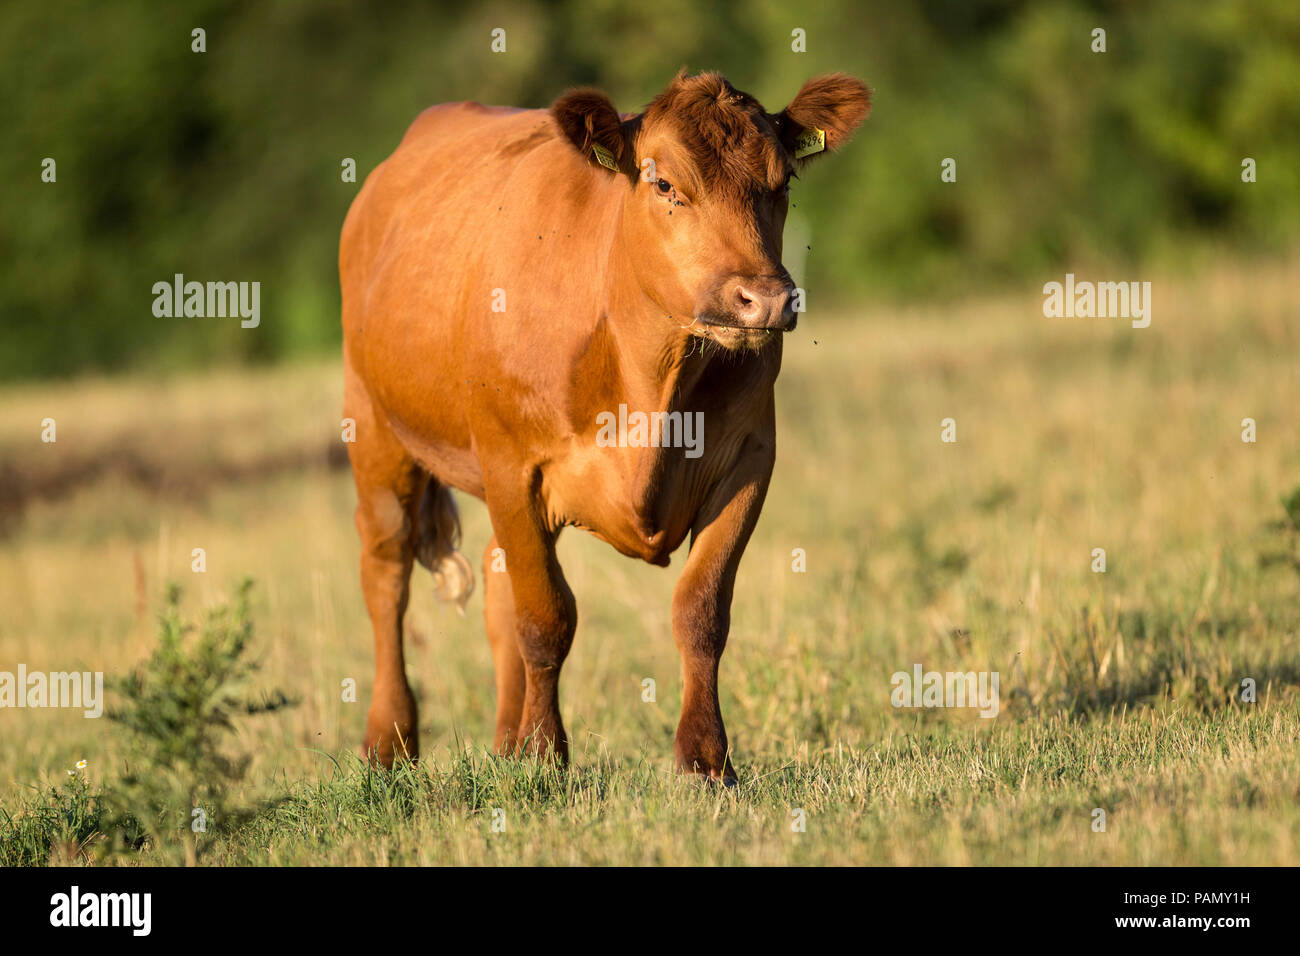 German Angus Cattle. Cow standing on a pasture. Germany Stock Photo